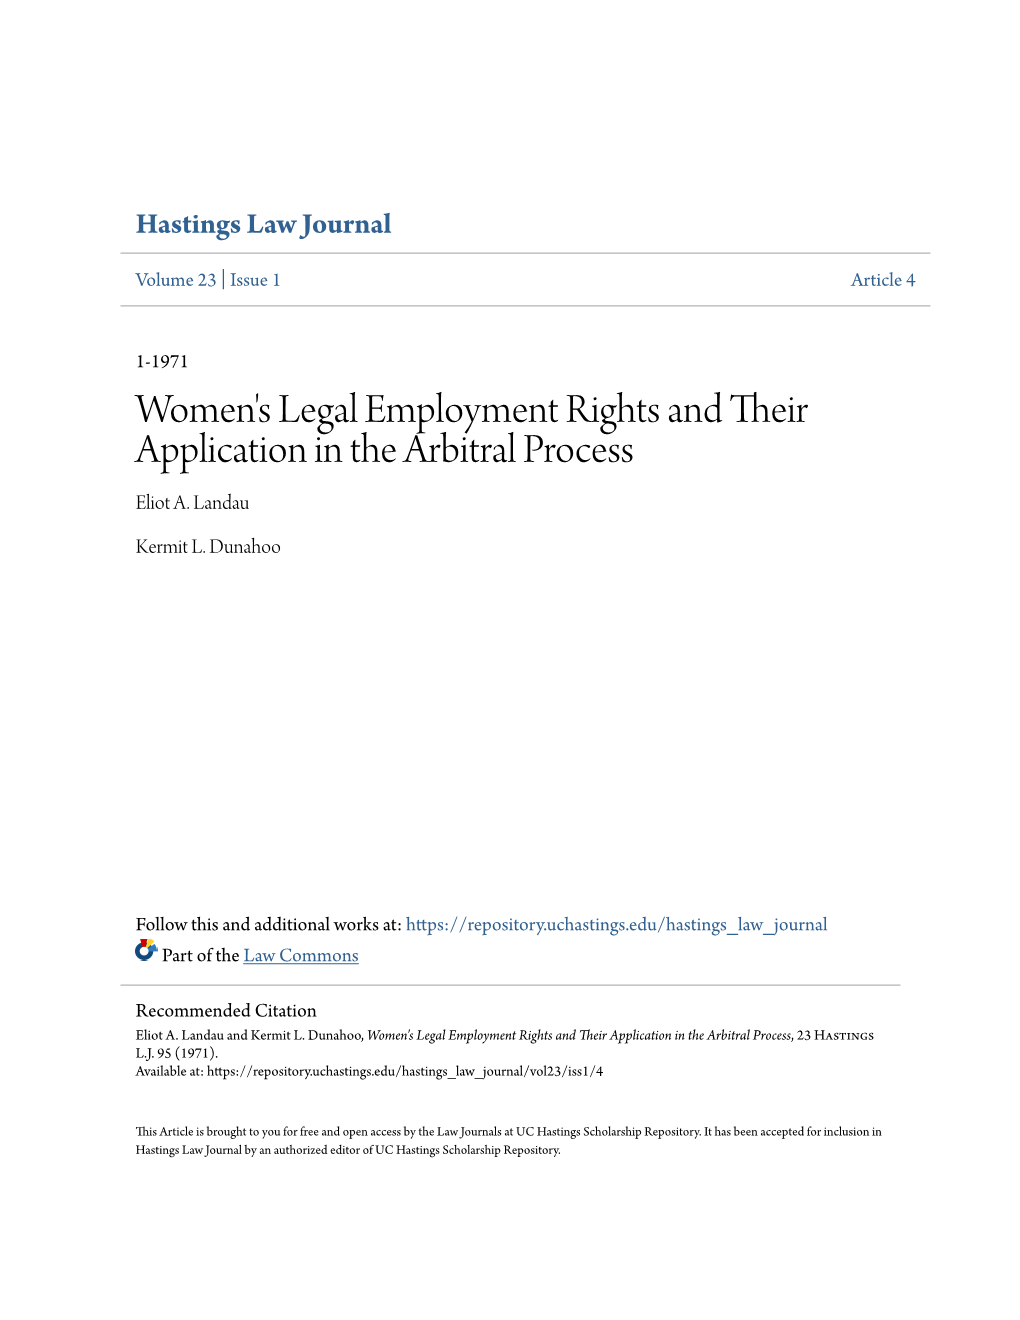 Women's Legal Employment Rights and Their Application in the Arbitral Process Eliot A